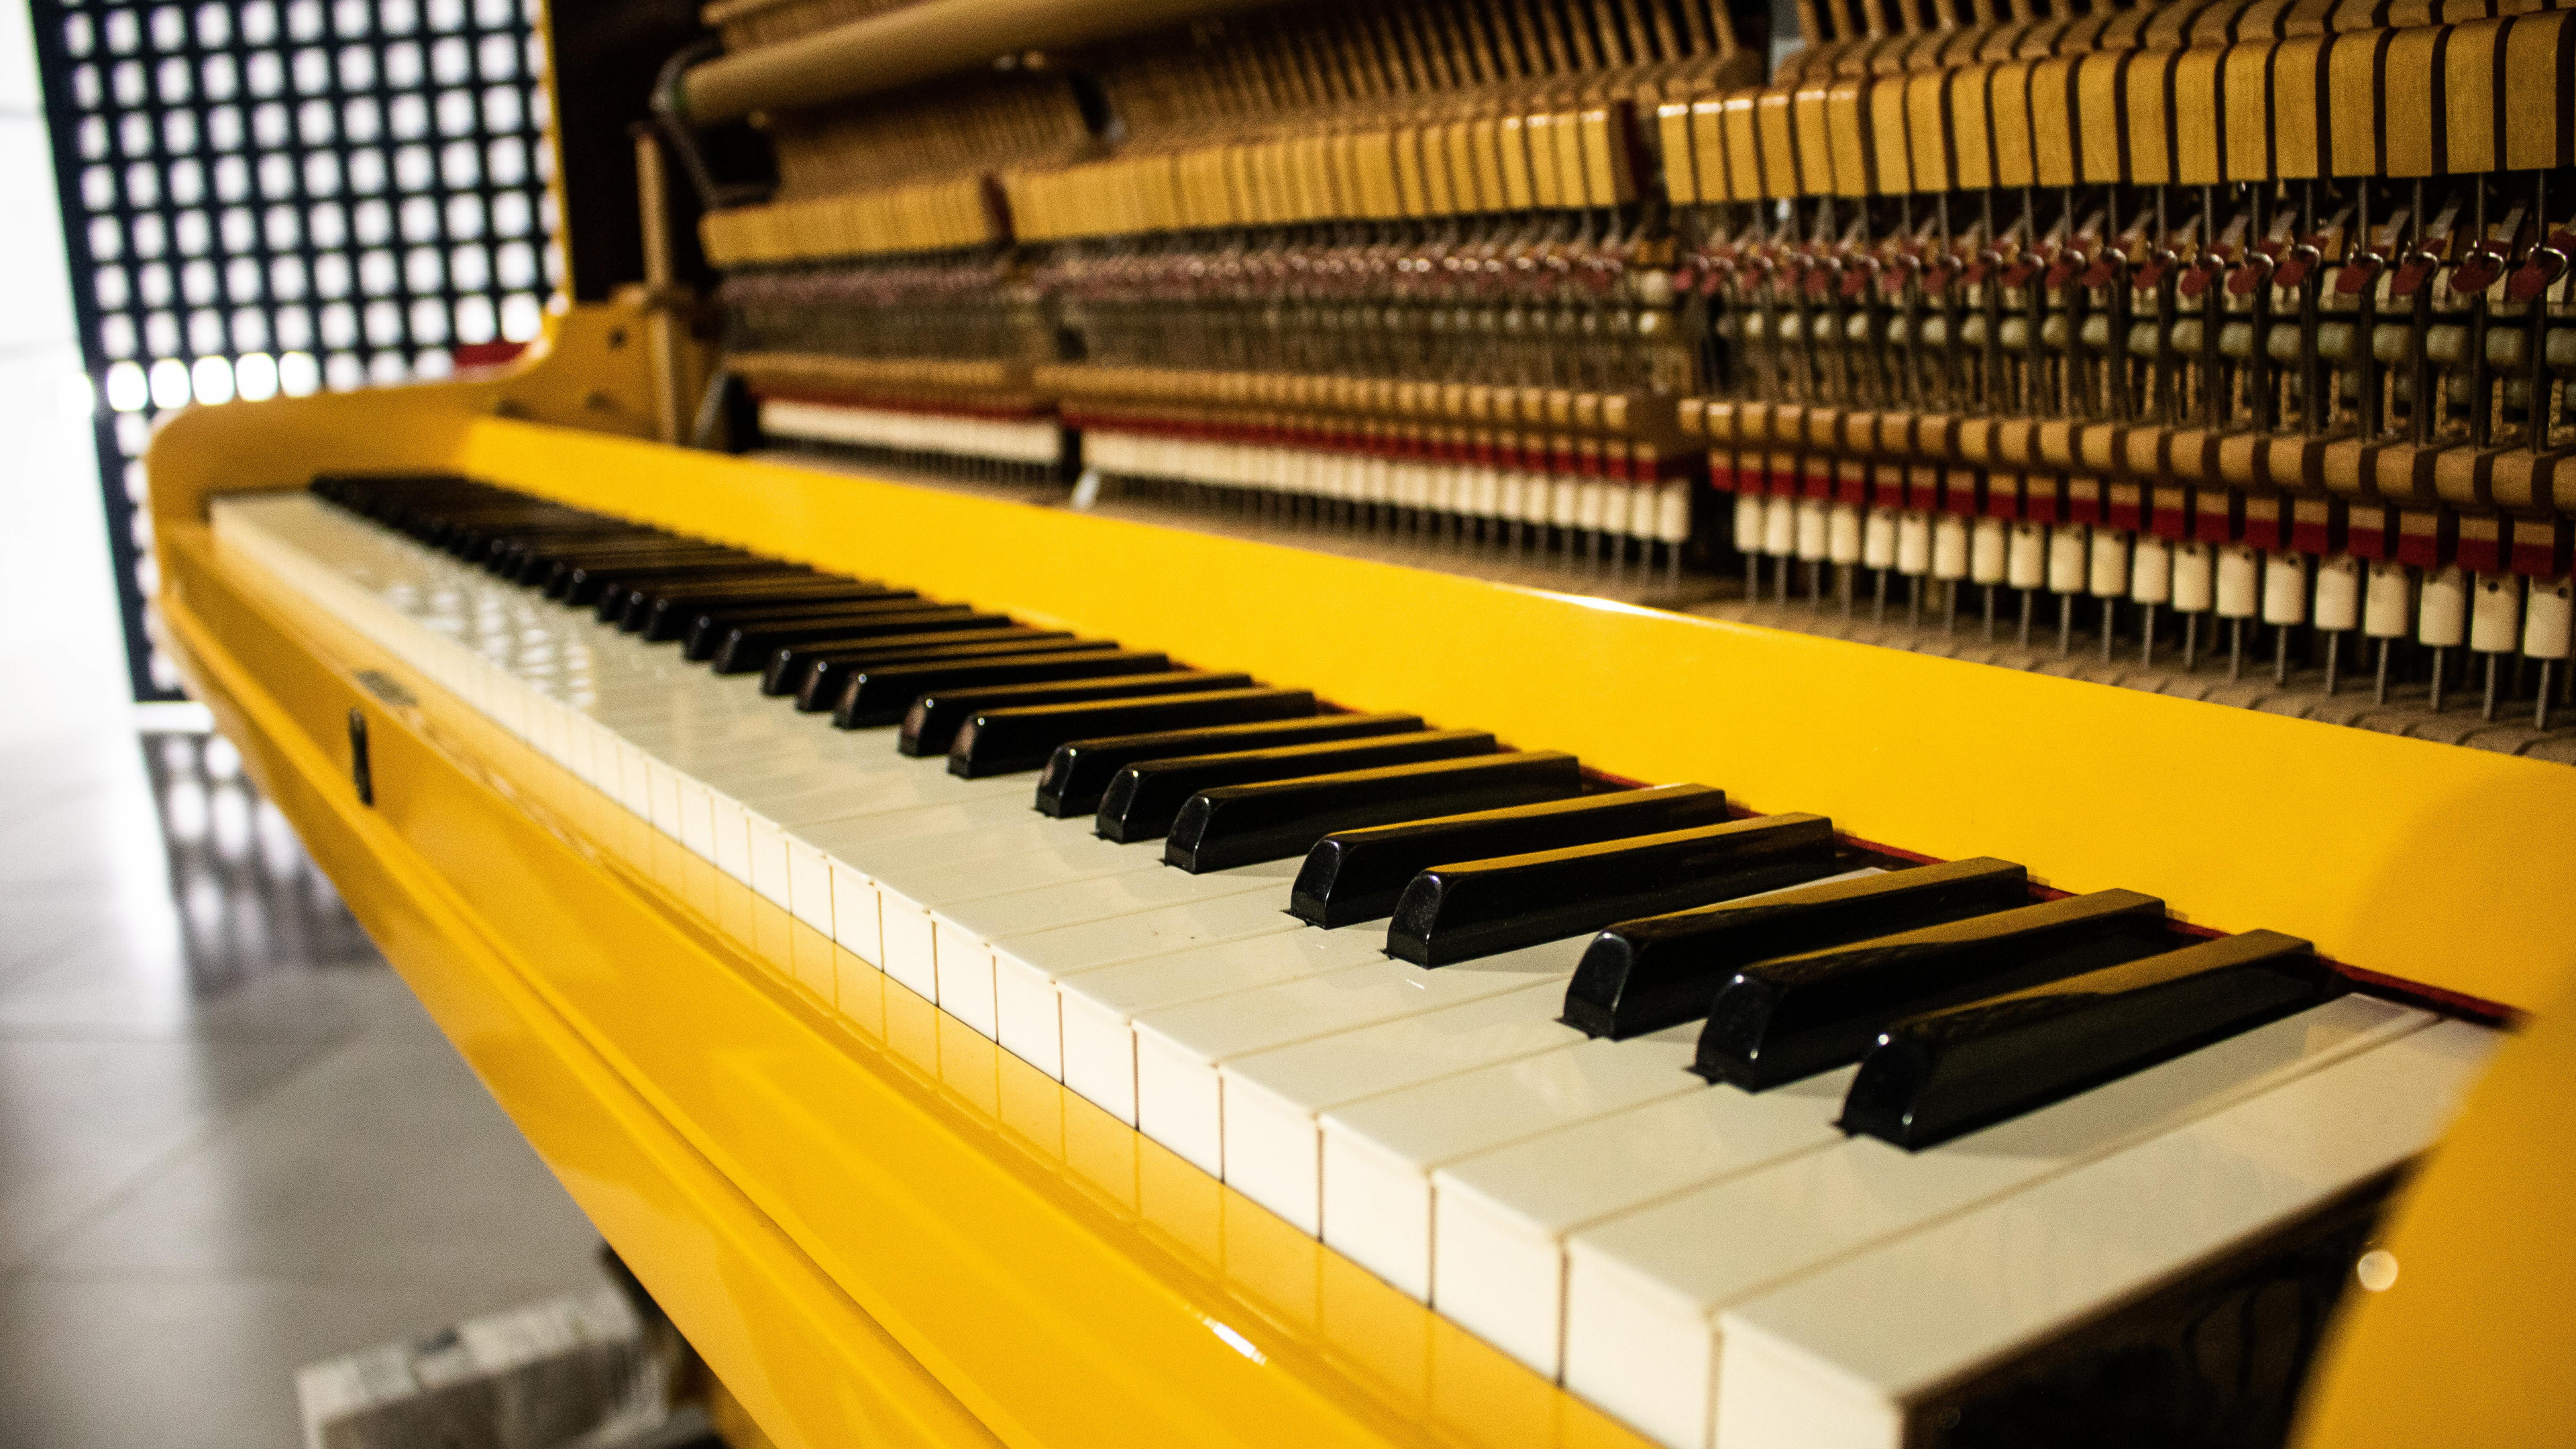 Piano: Modern Design Of Keyboard Instrument, Wooden Hammers Striking The Metall Strings. 3840x2160 4K Background.